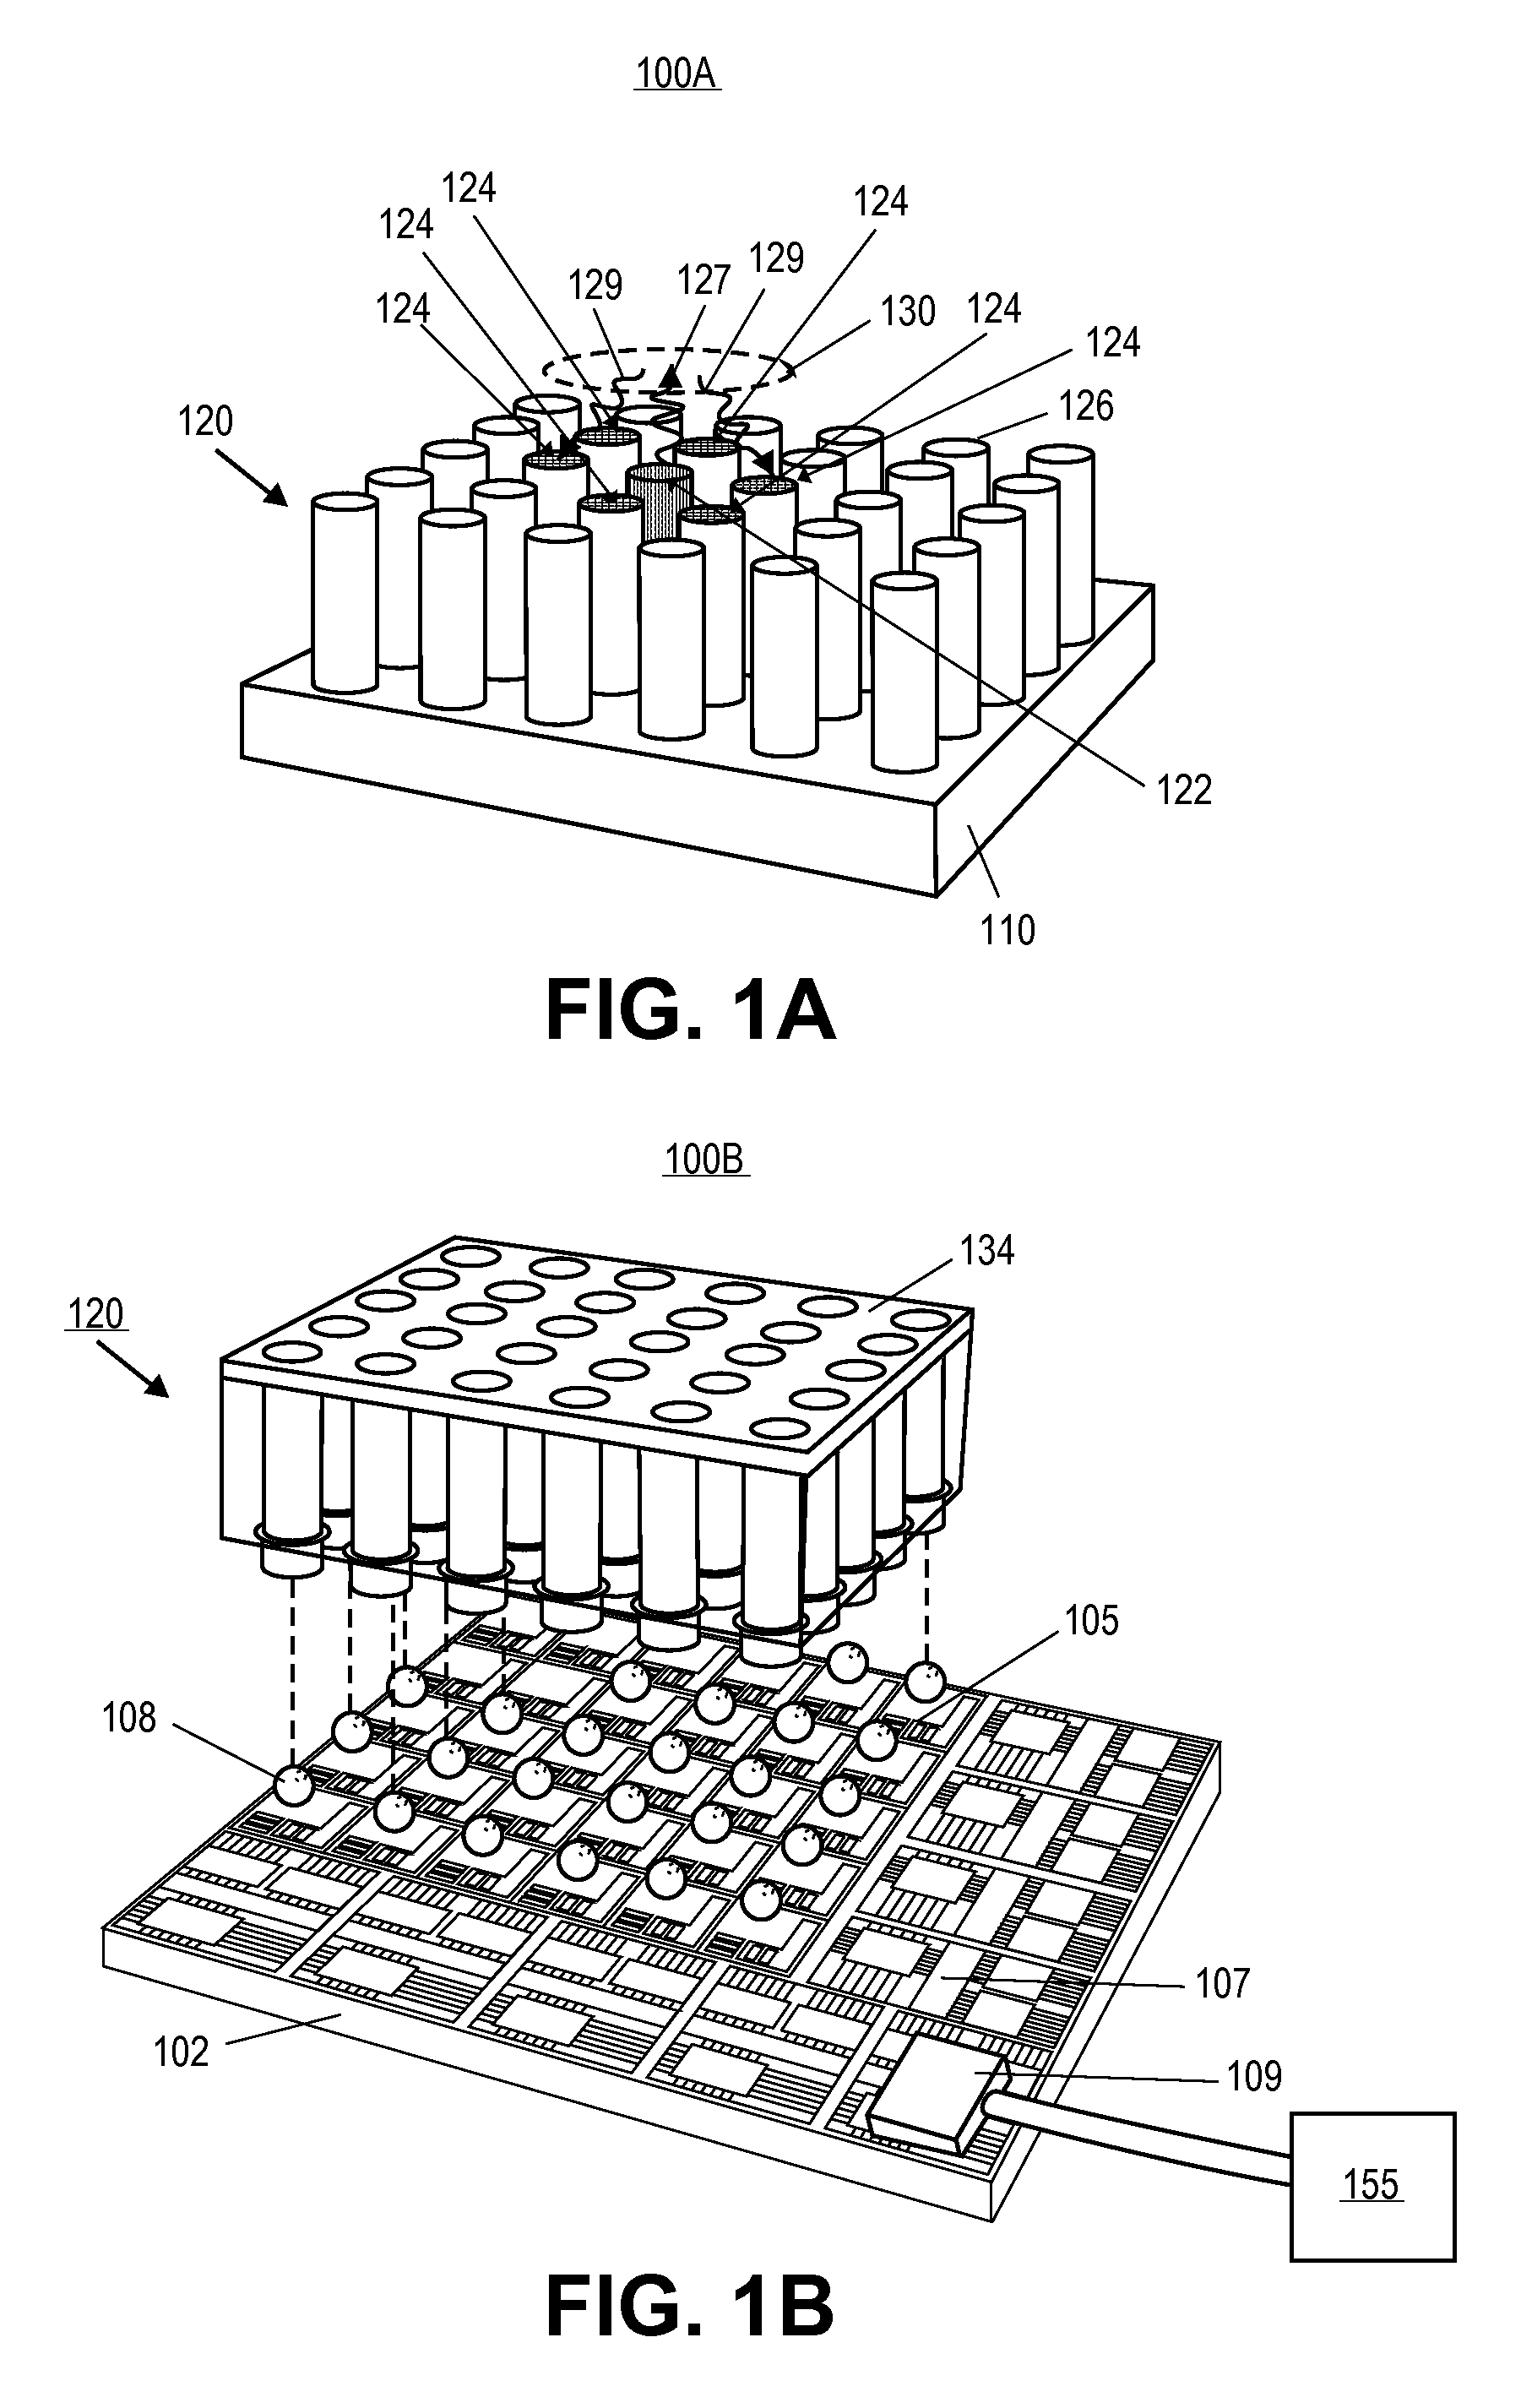 Phase-coupled arrays of nanowire laser devices and method of controlling an array of such devices